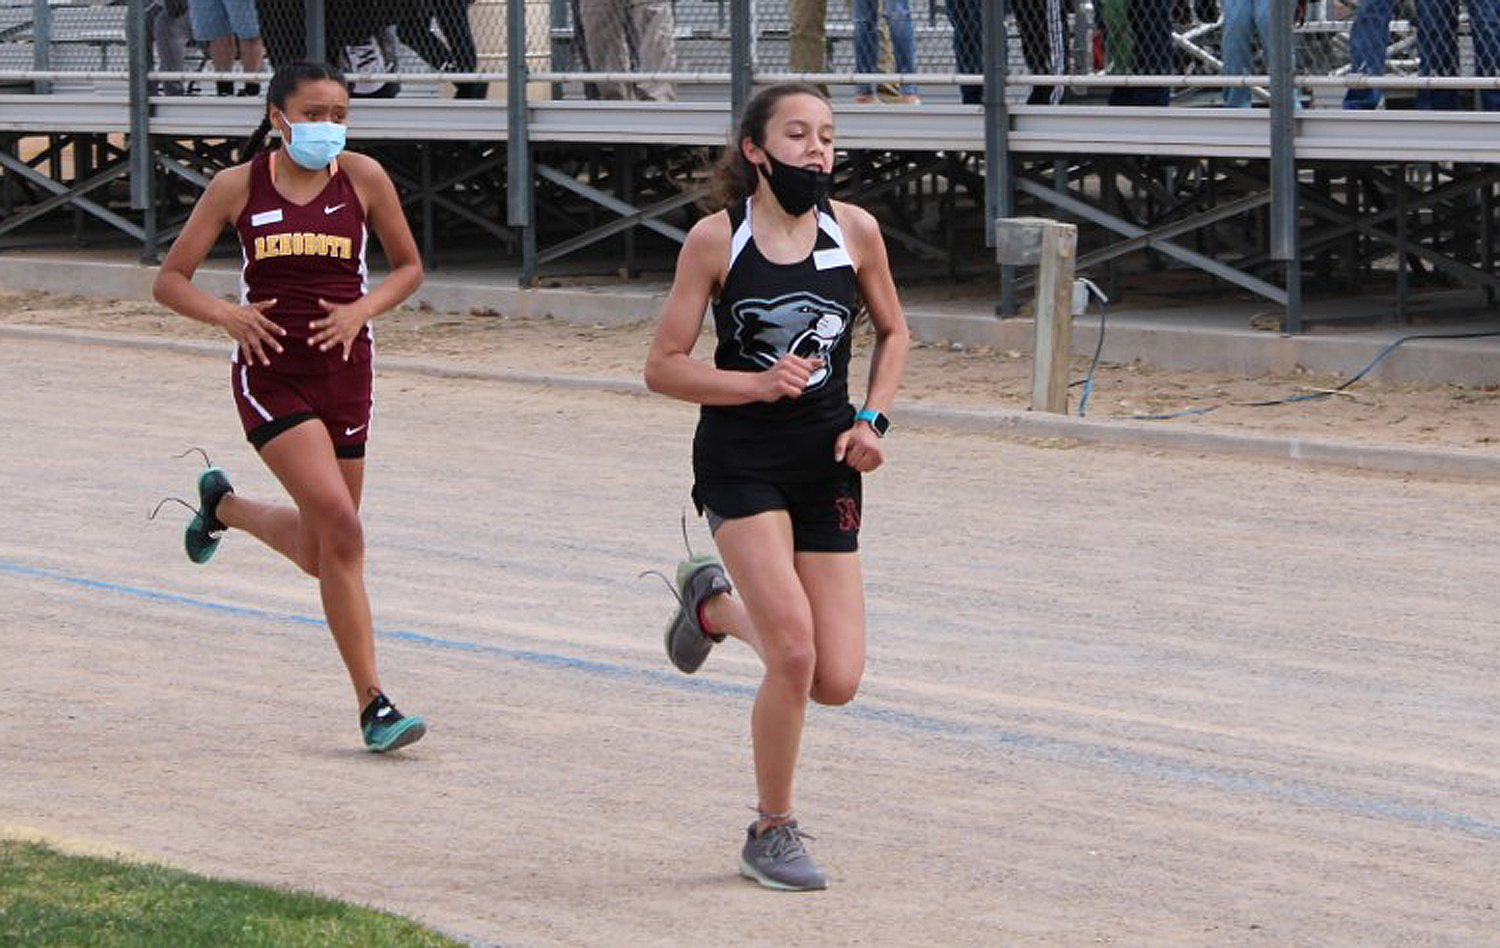 Panther Cross Country runner Charli B. tries to hold off a competitor in the St. Pius Cross Country trials on Saturday, March 13. Charli finished in second with a time of 22:37.